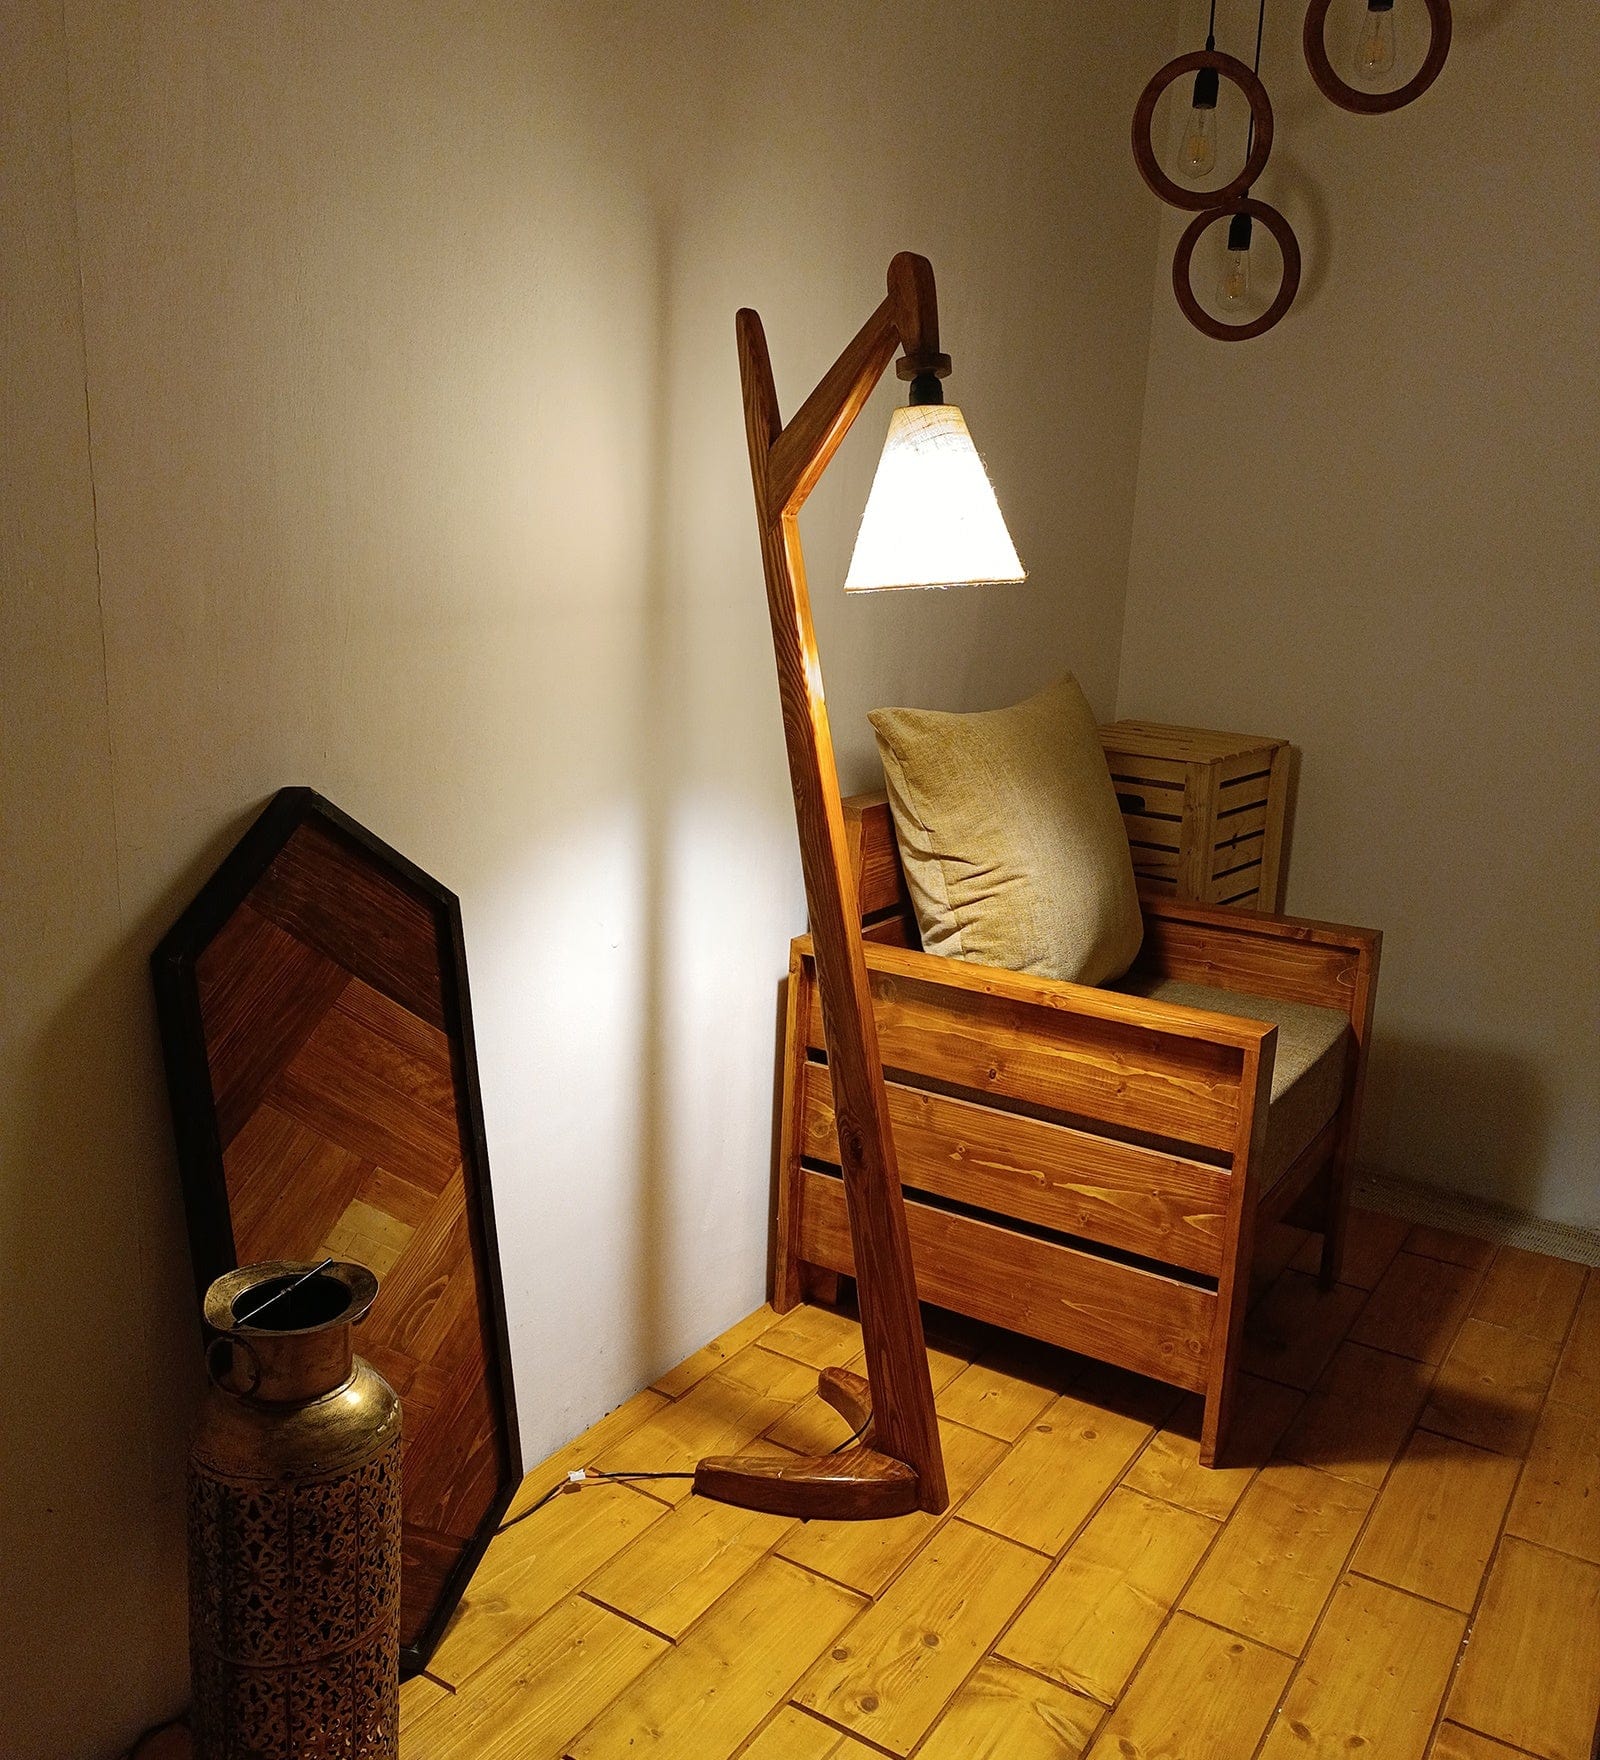 Druid Wooden Floor Lamp with Brown Base and Jute Fabric Lampshade (BULB NOT INCLUDED)